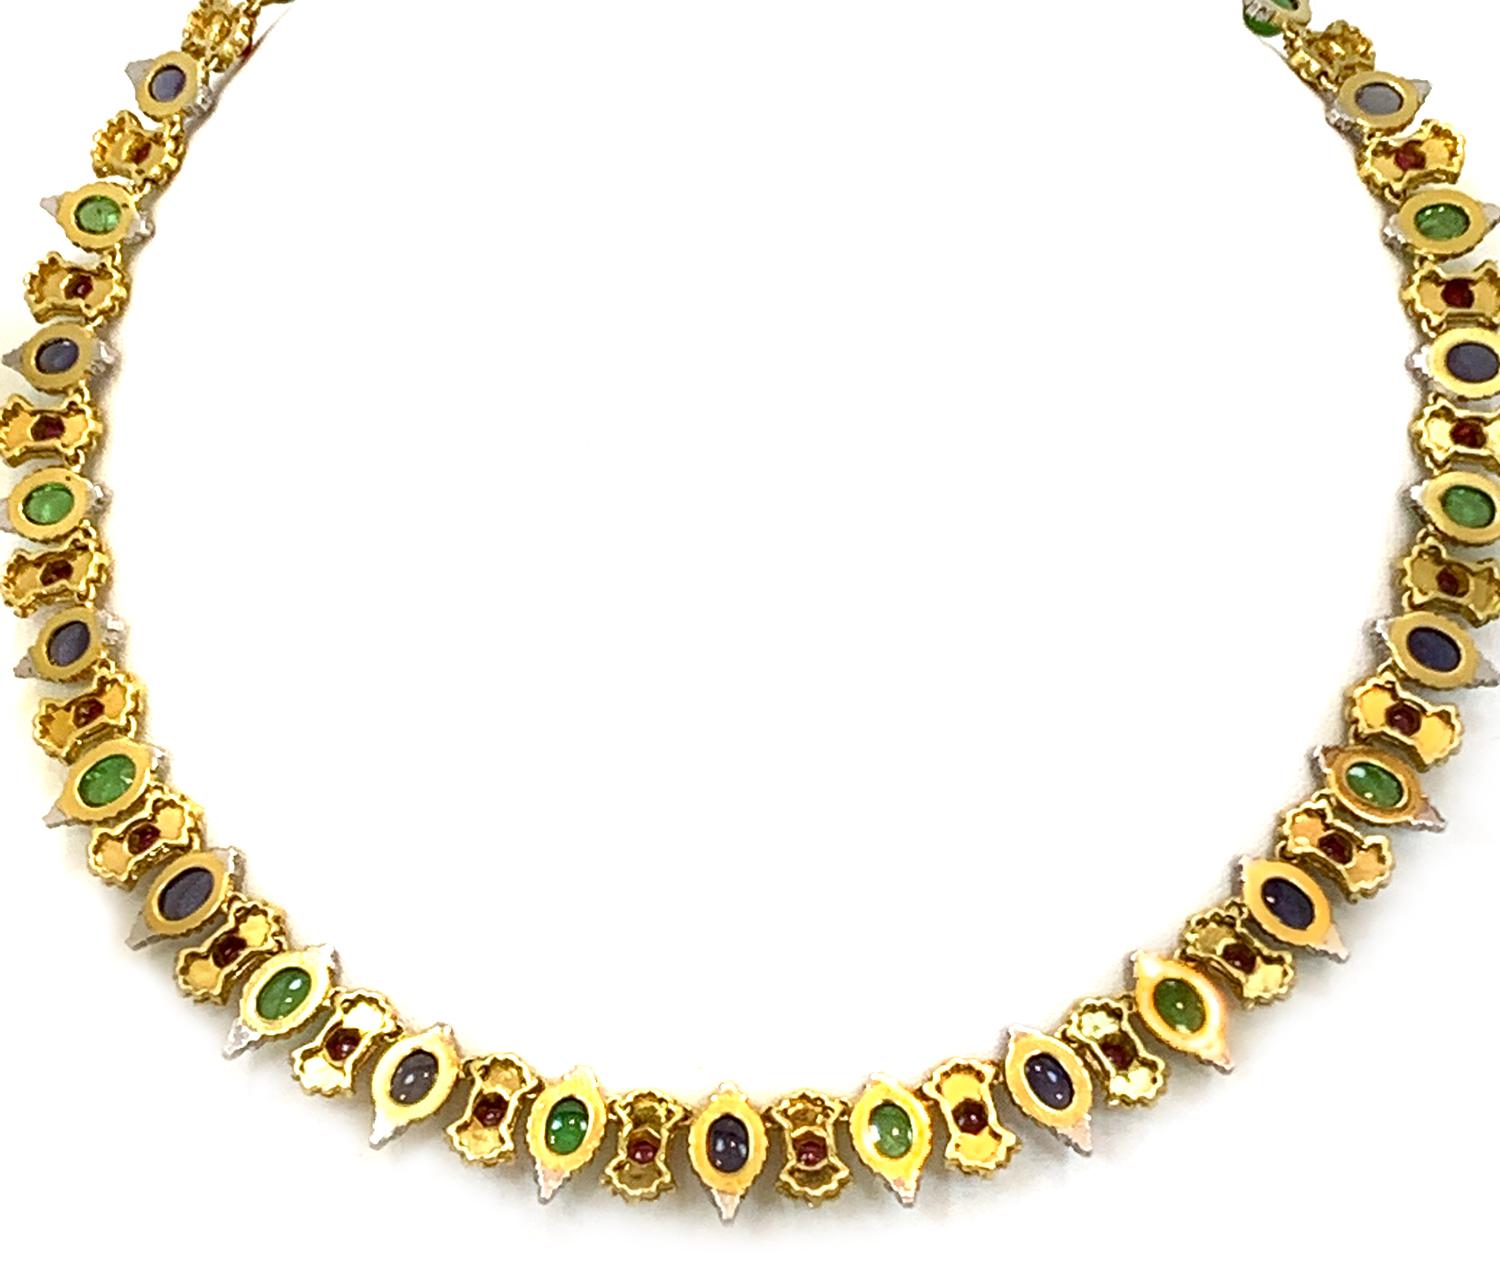 Signed Buccellati
 18k yellow gold necklace with (14) cabochon sapphires.
Gemstone- Peridot, Sapphire and Ruby 
Width- 5.6 inches
Length- 6.95 iches
Weight- 51.6 g
Hallmark-N/A
Place of Origin- Italy
Condition- Pre-owned/ Excellent
Item No-